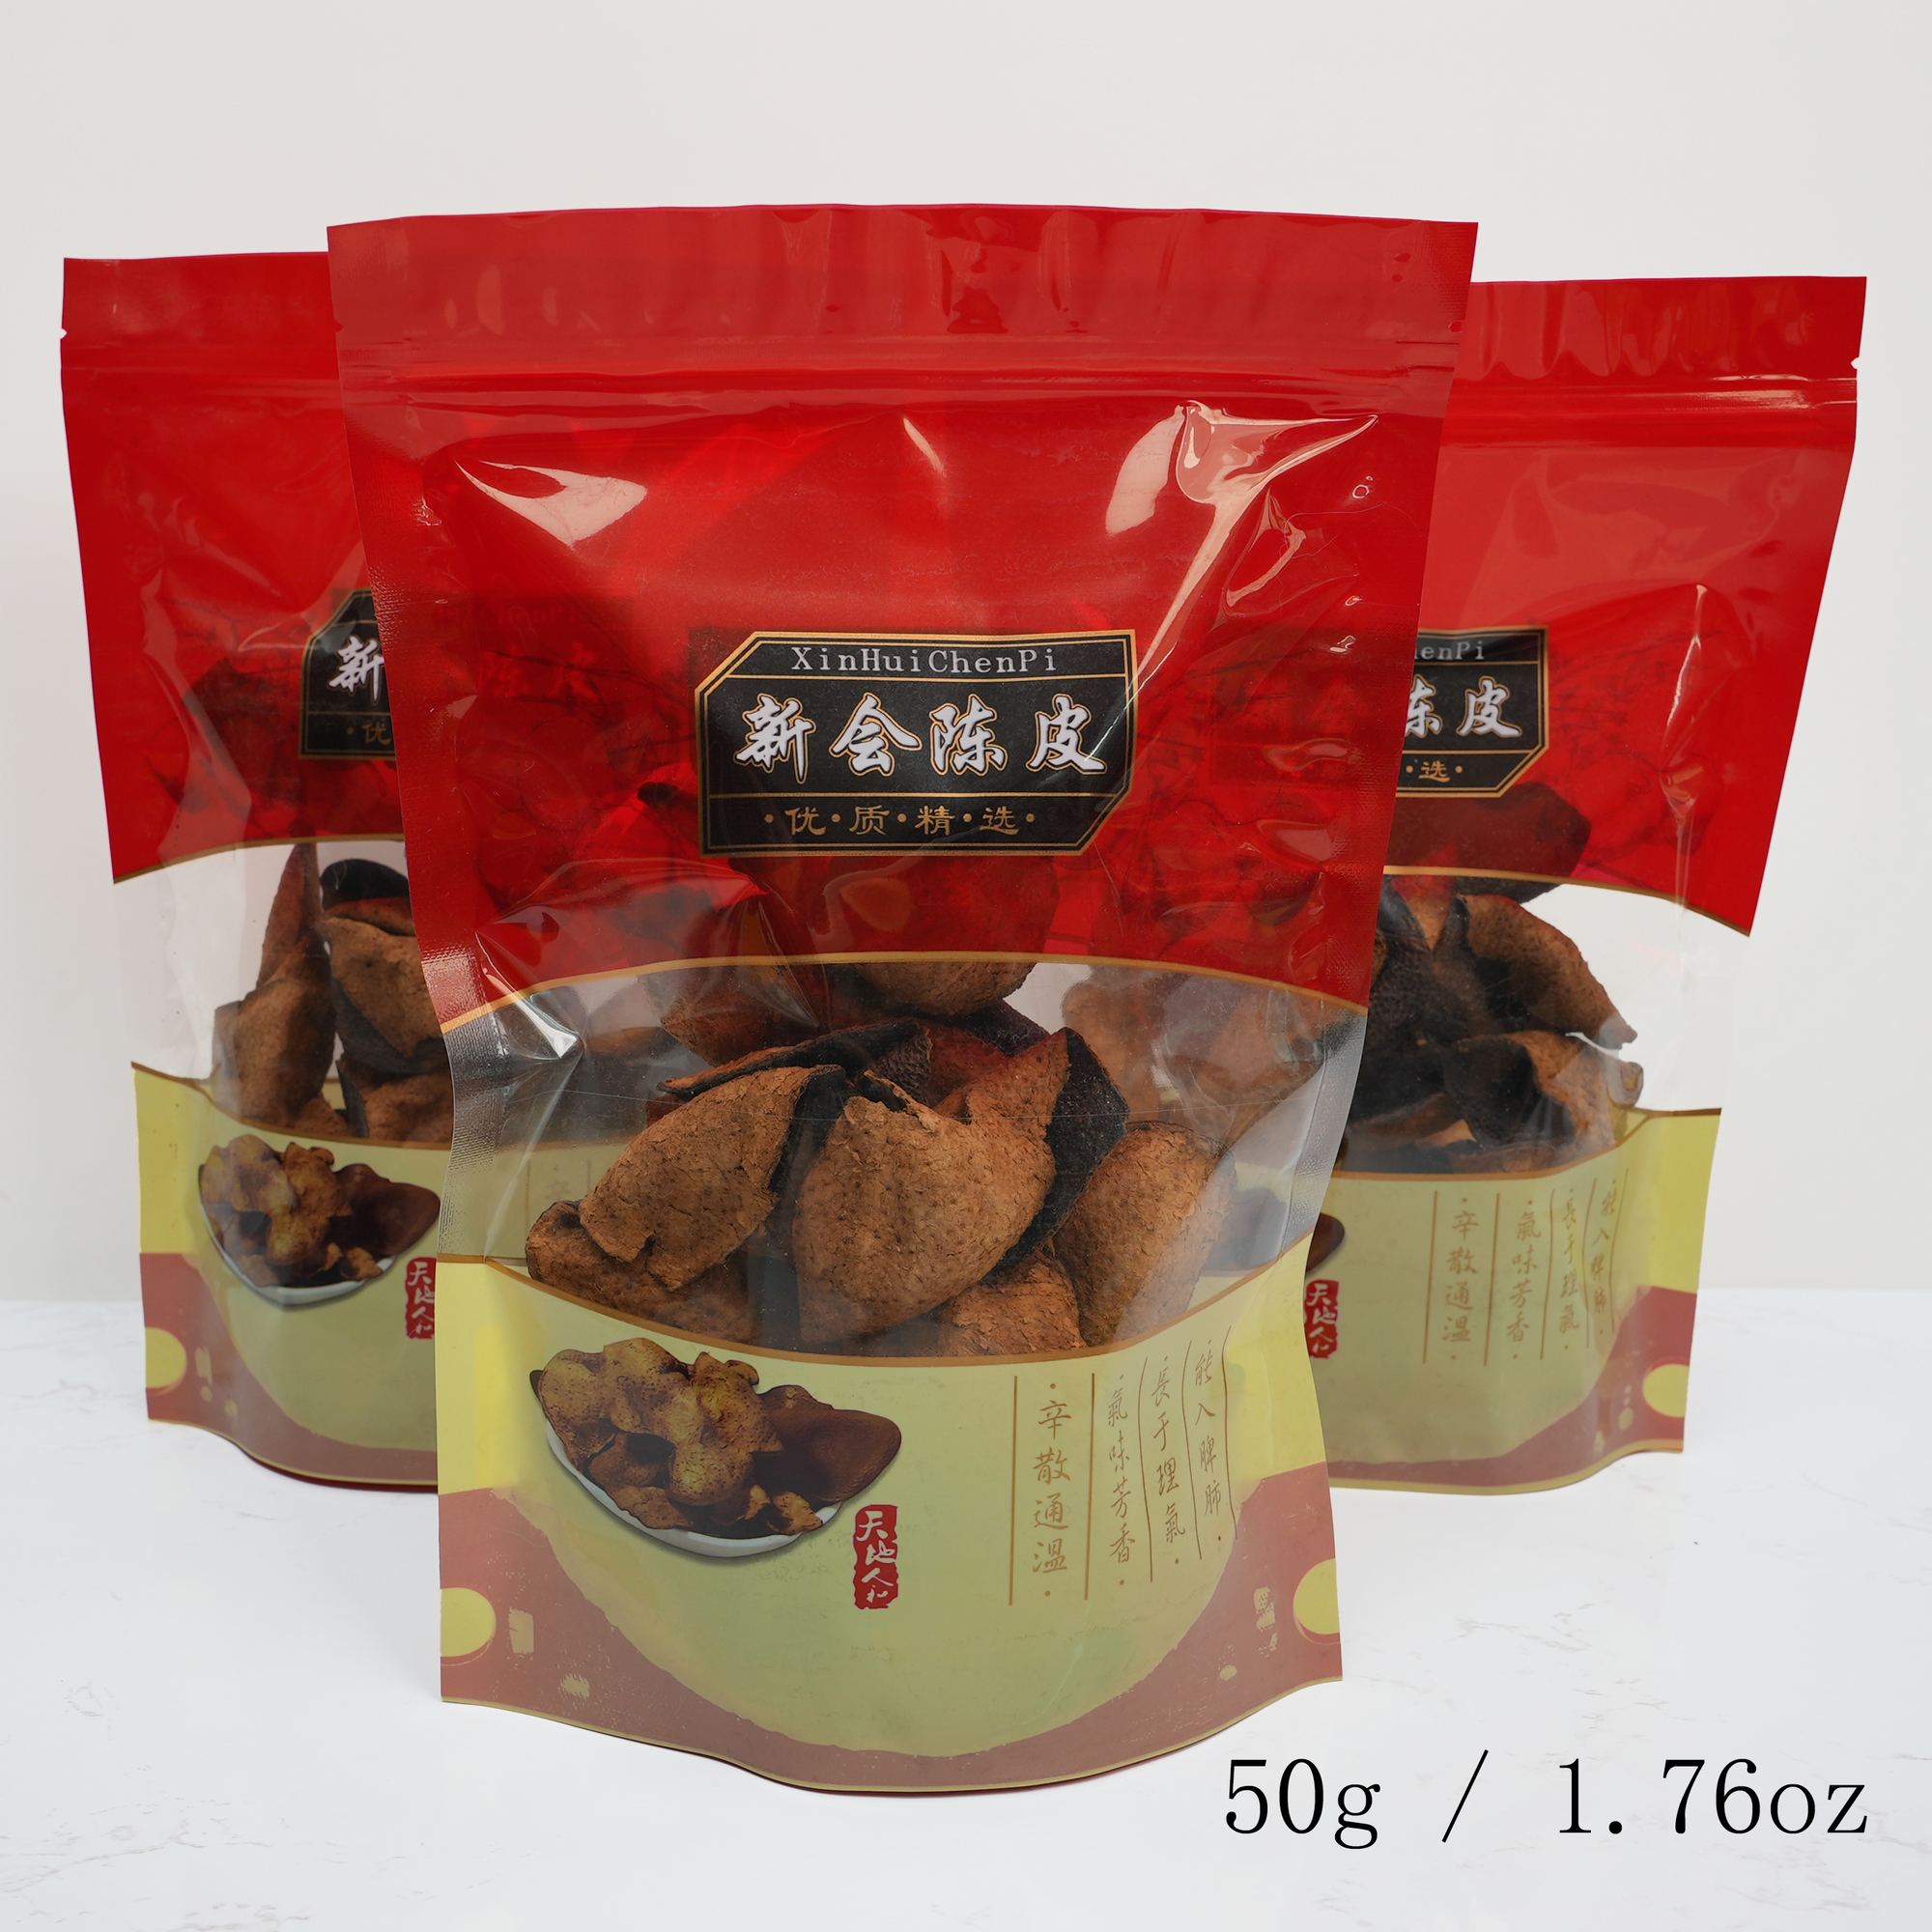 Chinese Chen Pi - Aged Orange Peel for Cooking (50g / 1.76oz)